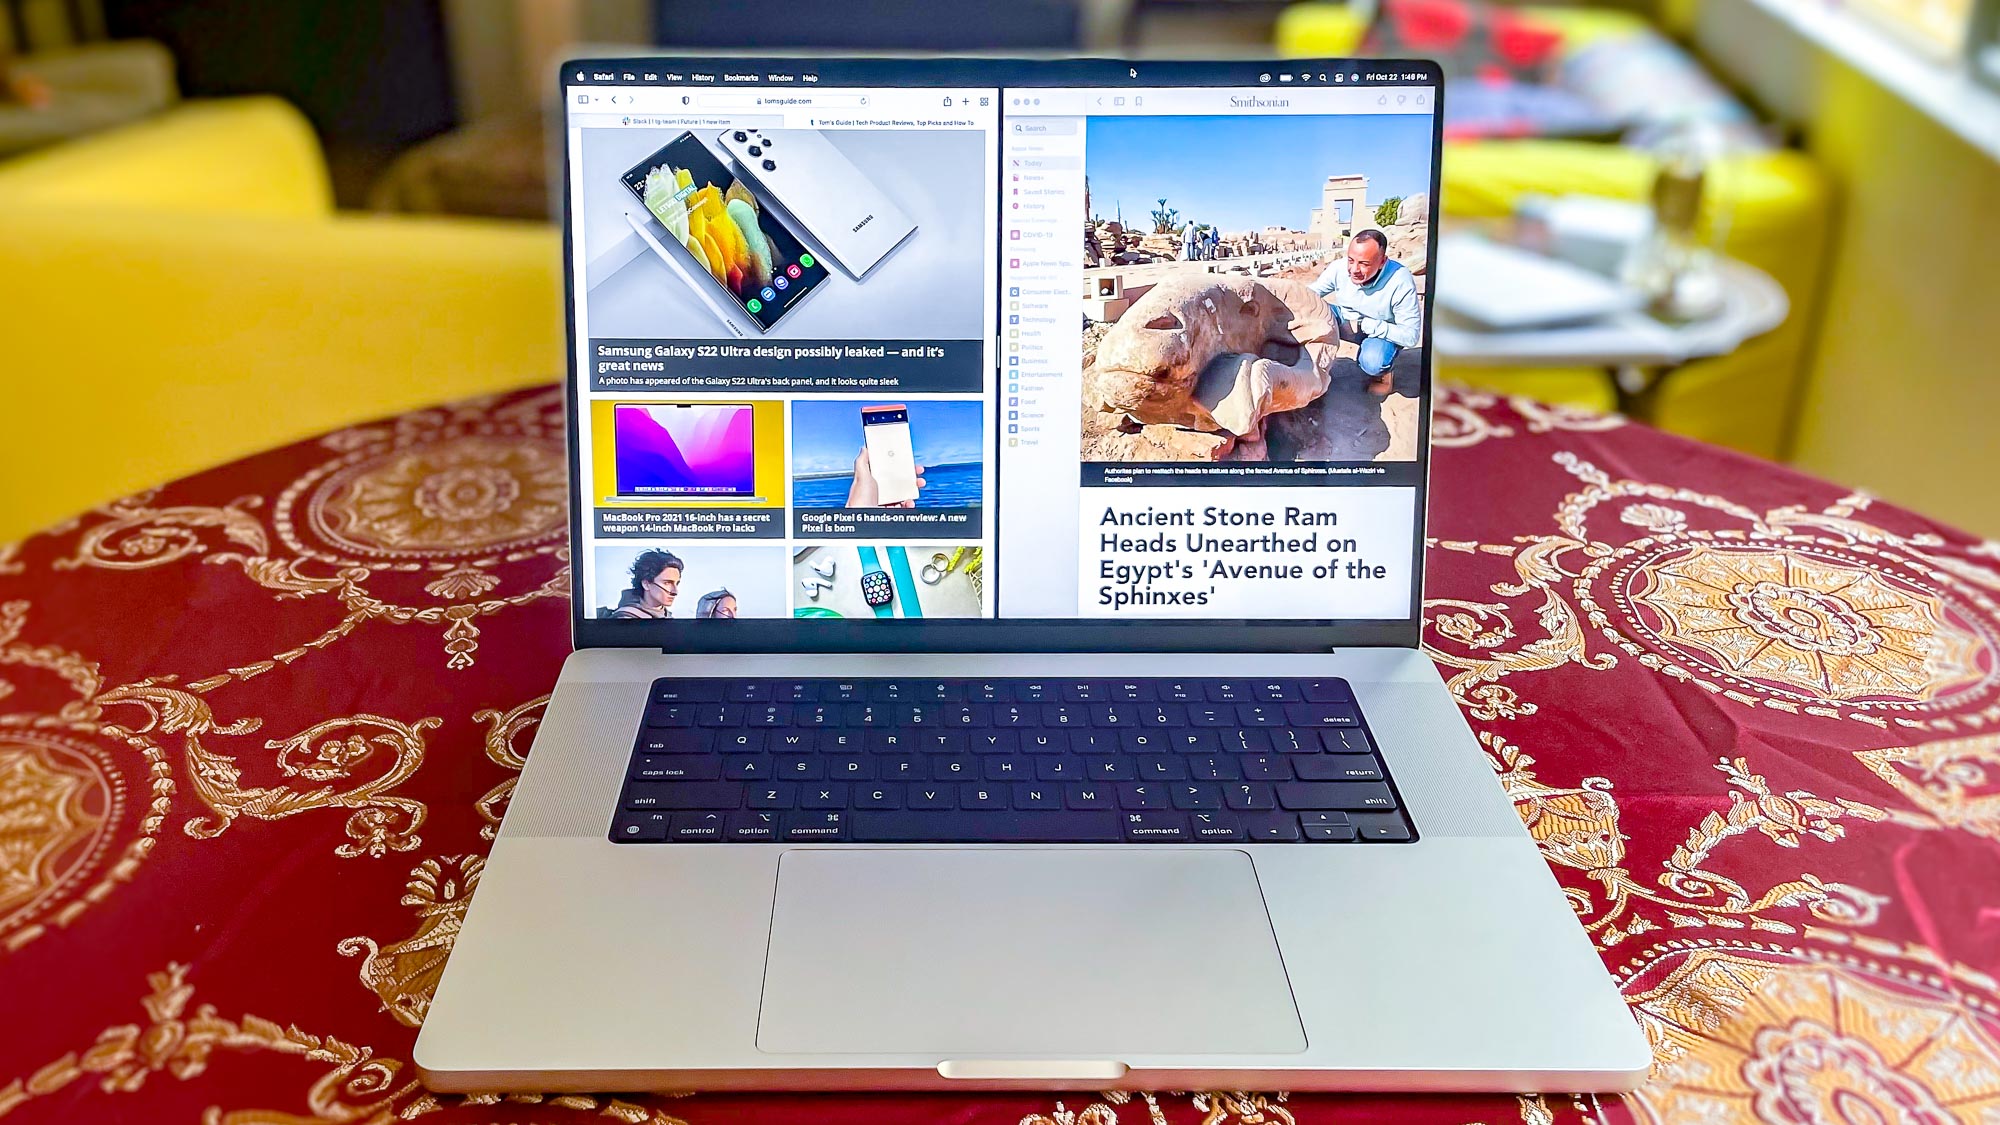 MacBook Pro 2021 (16-inch) sitting on a table showing two webpages side by side